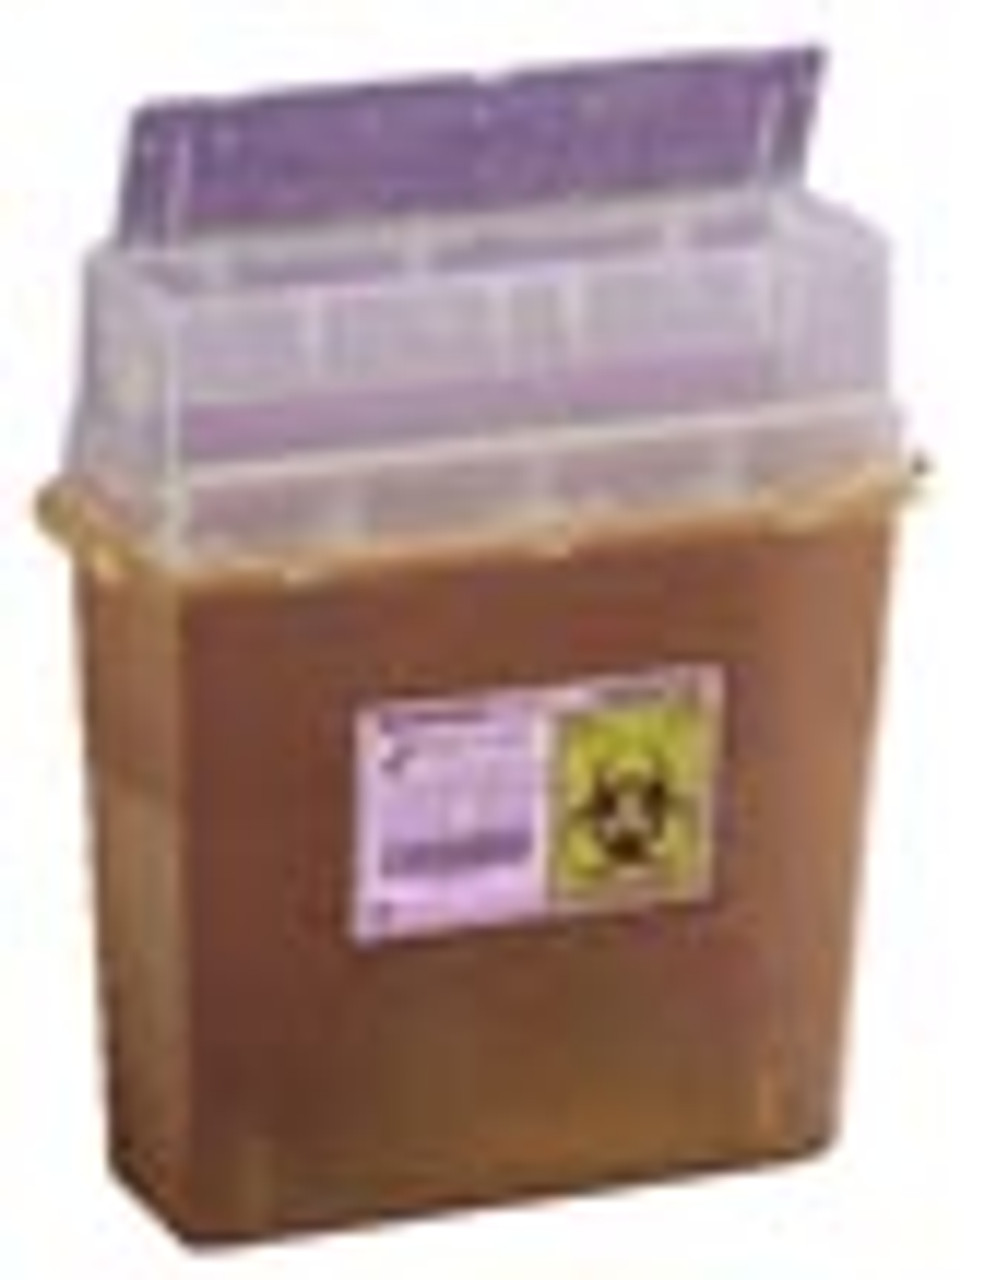 Sharps-A-Gator™ Multi-Purpose Sharps Container with Sliding Lid, 2